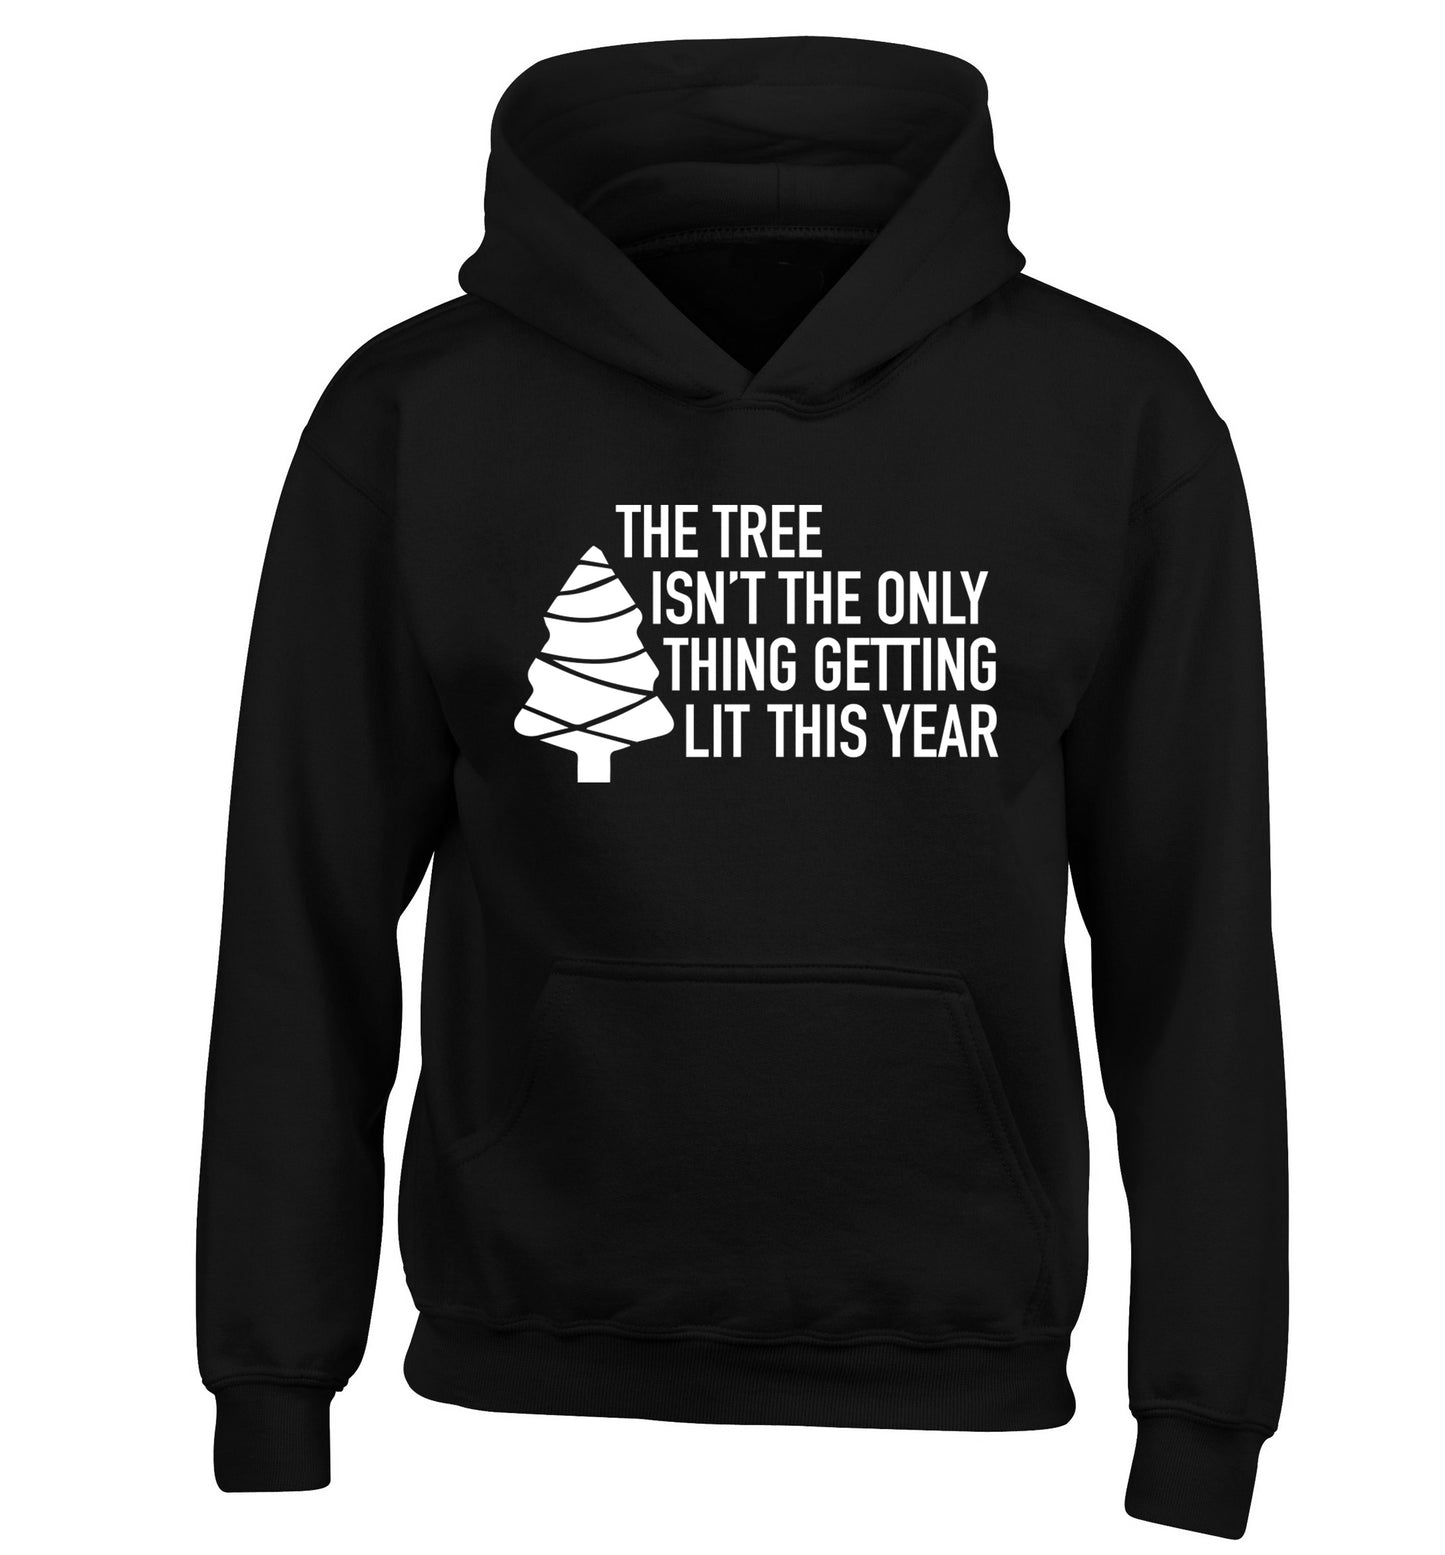 The tree isn't the only thing getting lit this year children's black hoodie 12-14 Years